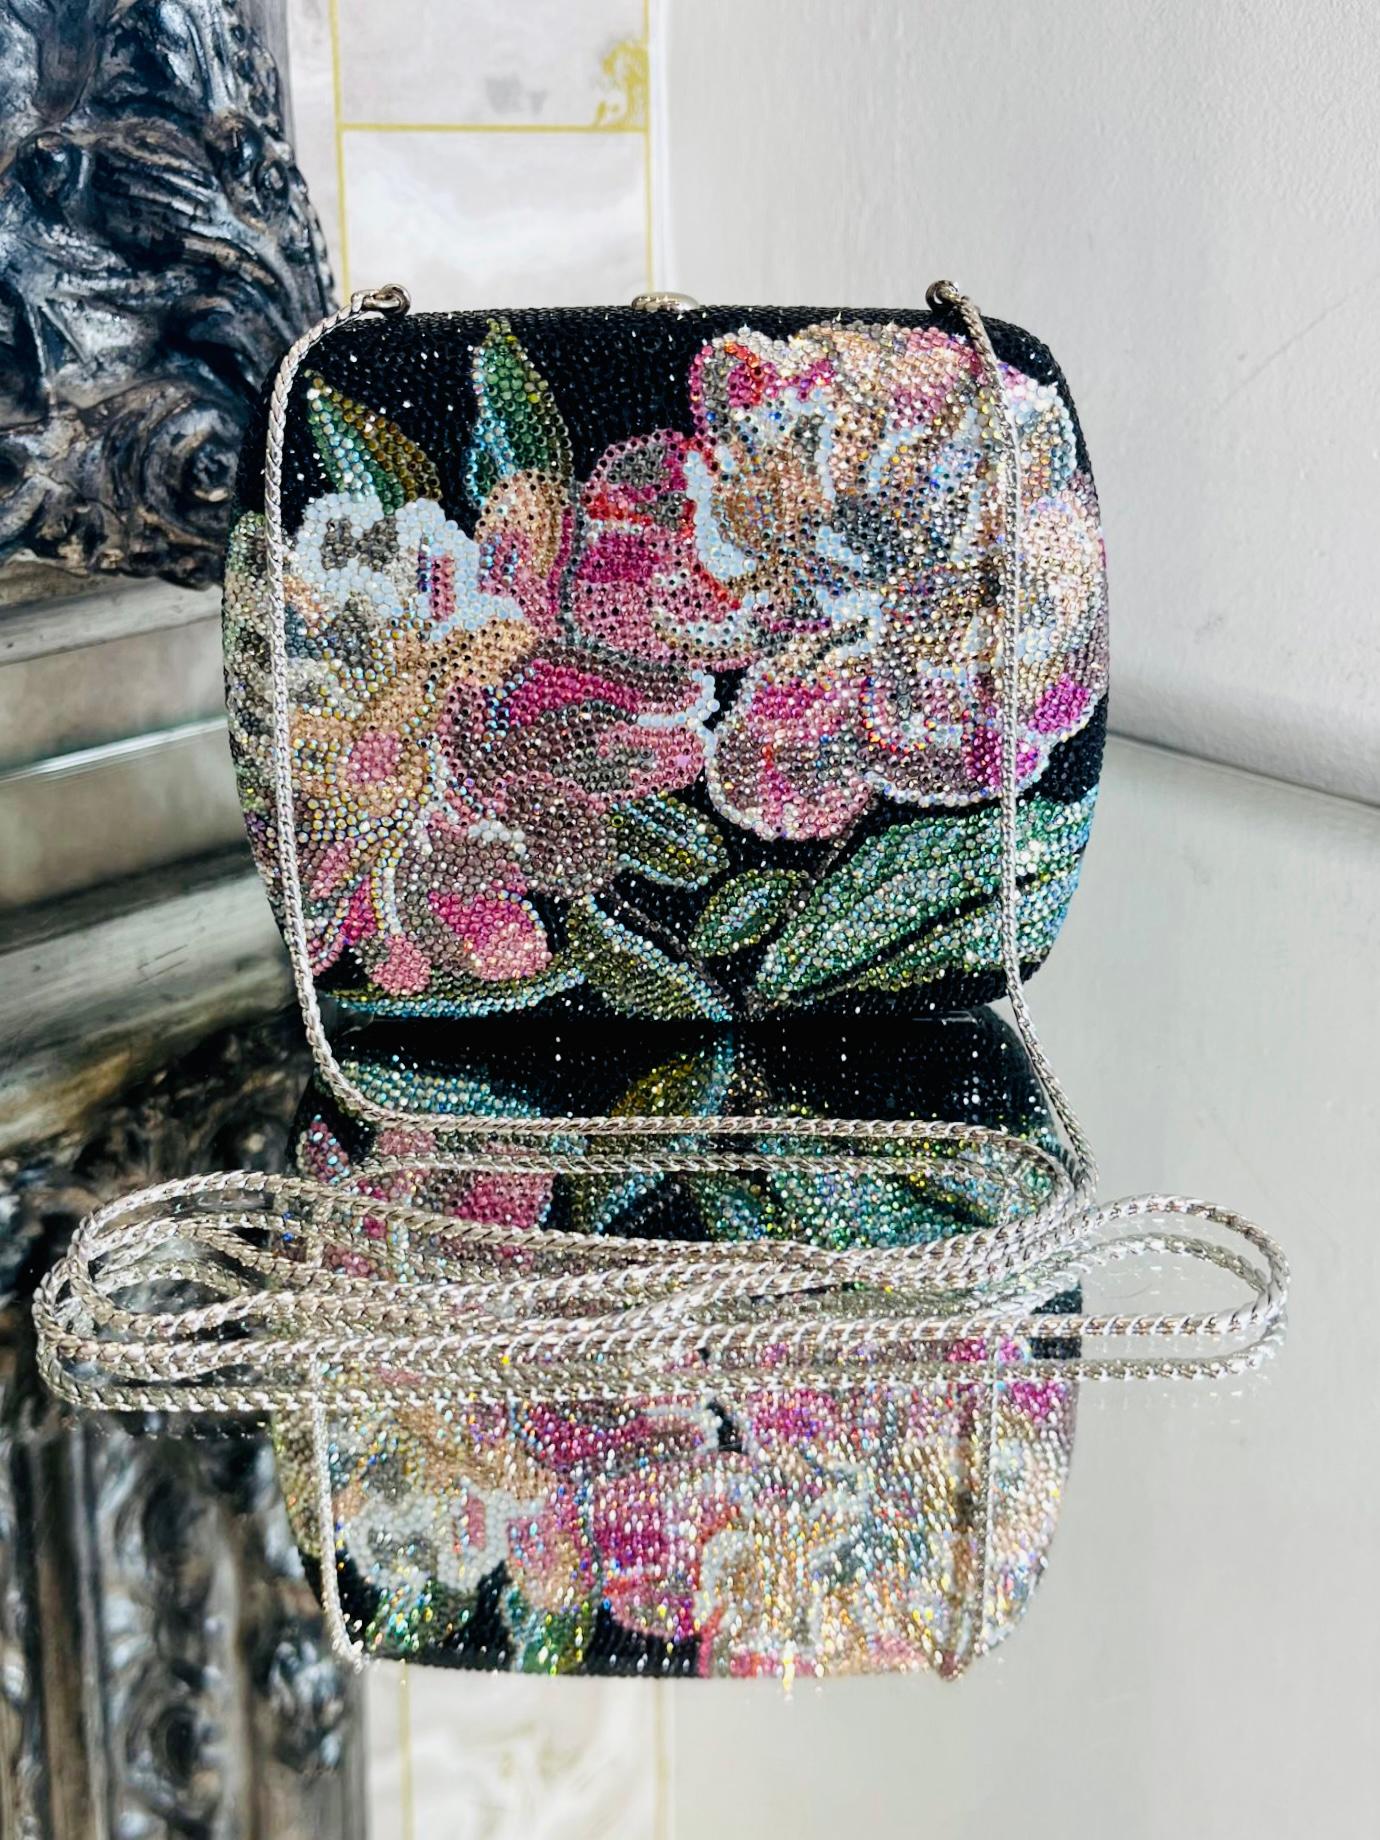 Judith Leiber Floral Crystal Box Bag

Black satin hard box bag, fully adorned with floral crystals and a silver

chain strap. Mini mirror and leather purse.

Size - Height 11.5cm, Width 13.5cm, Depth

Condition - Good (A few missing